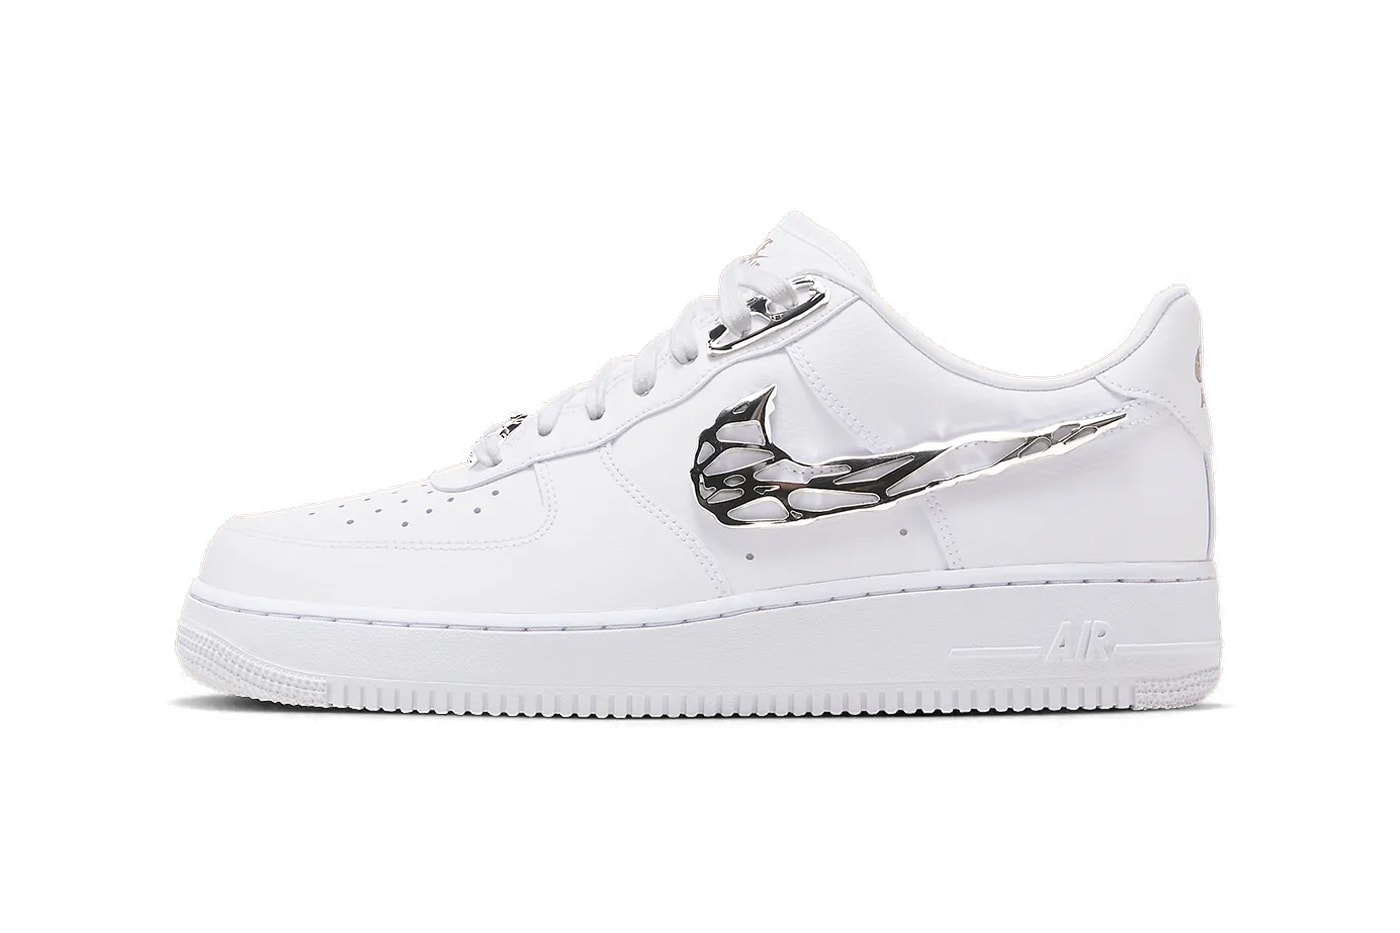 Latest Nike Air Force 2 Releases & Next Drops in 2023